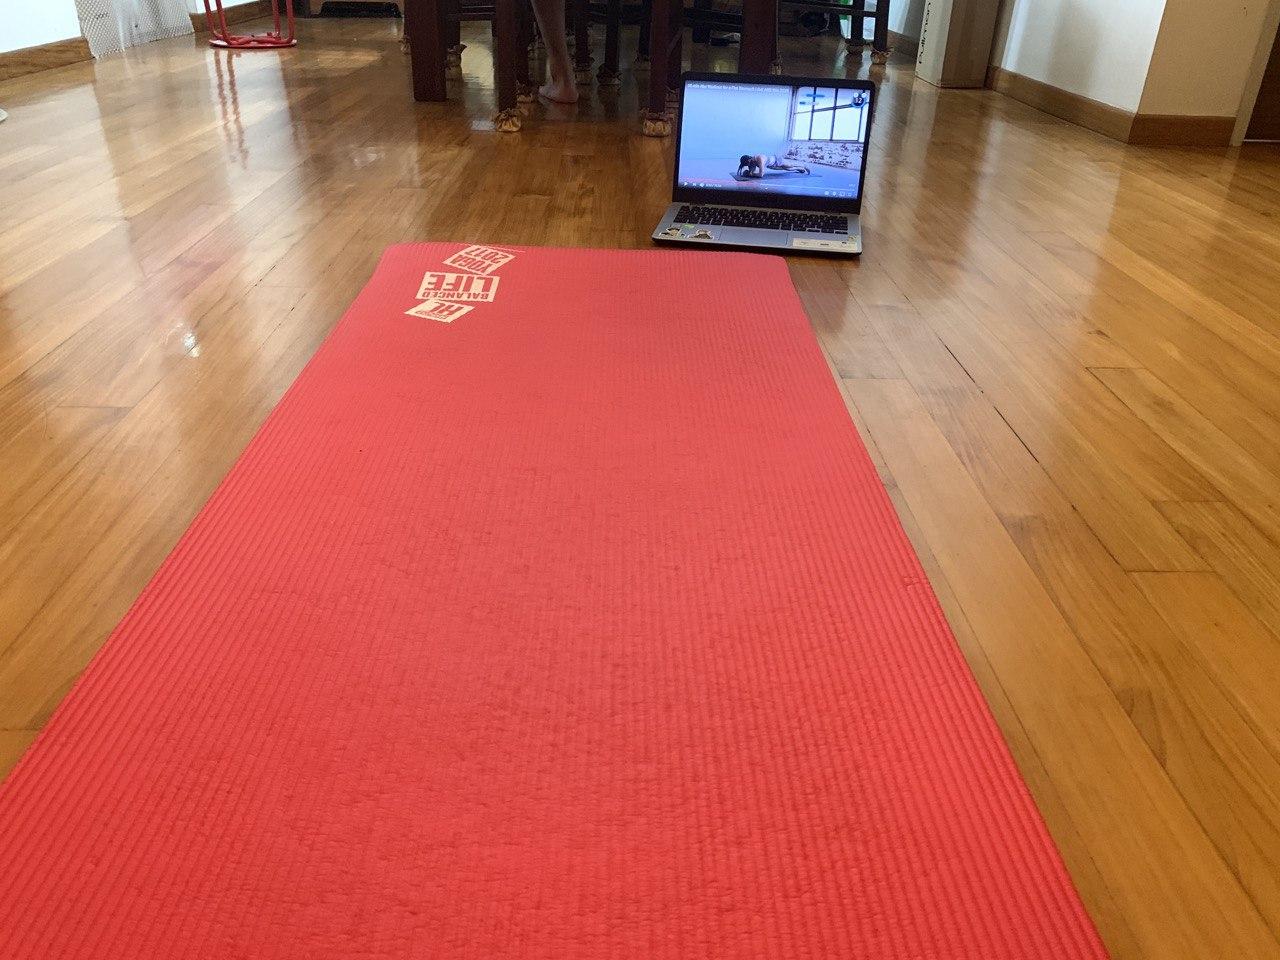 A fitness mat with a laptop showing Chloe Ting's ab workout for people who are trying to stay fit during the circuit breaker period which was set in order to contain the spread of Covid-19 cases in Singapore.